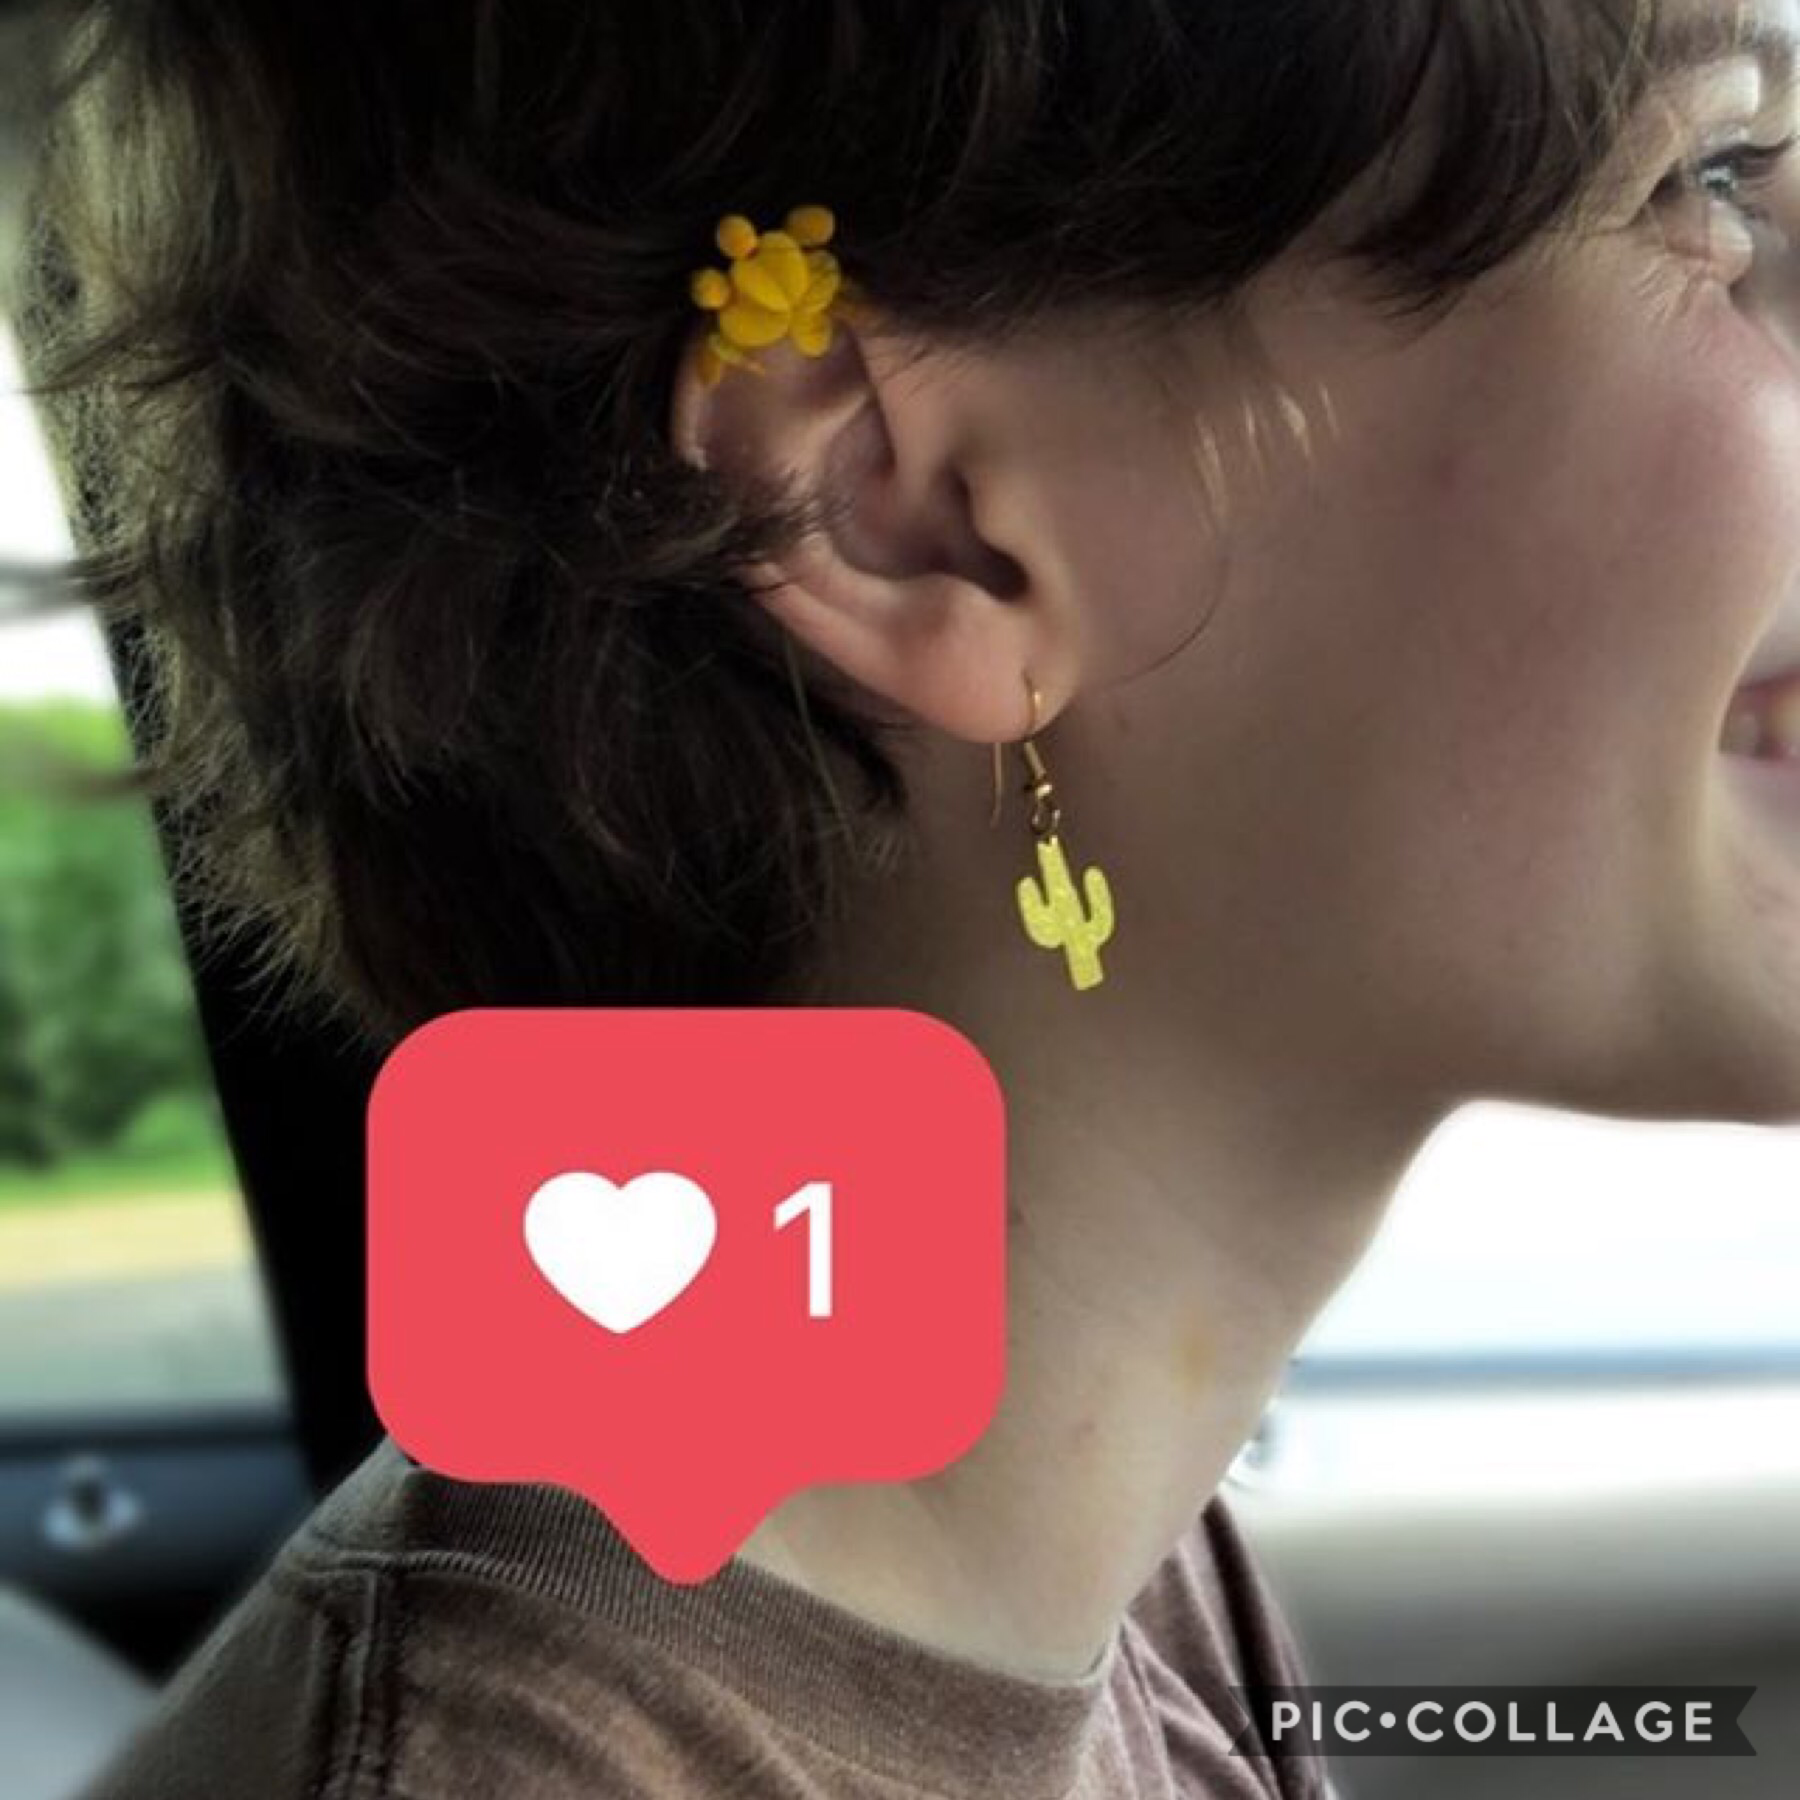 i can’t believe i have a gf who puts flowers in my hair and takes cute pictures of me